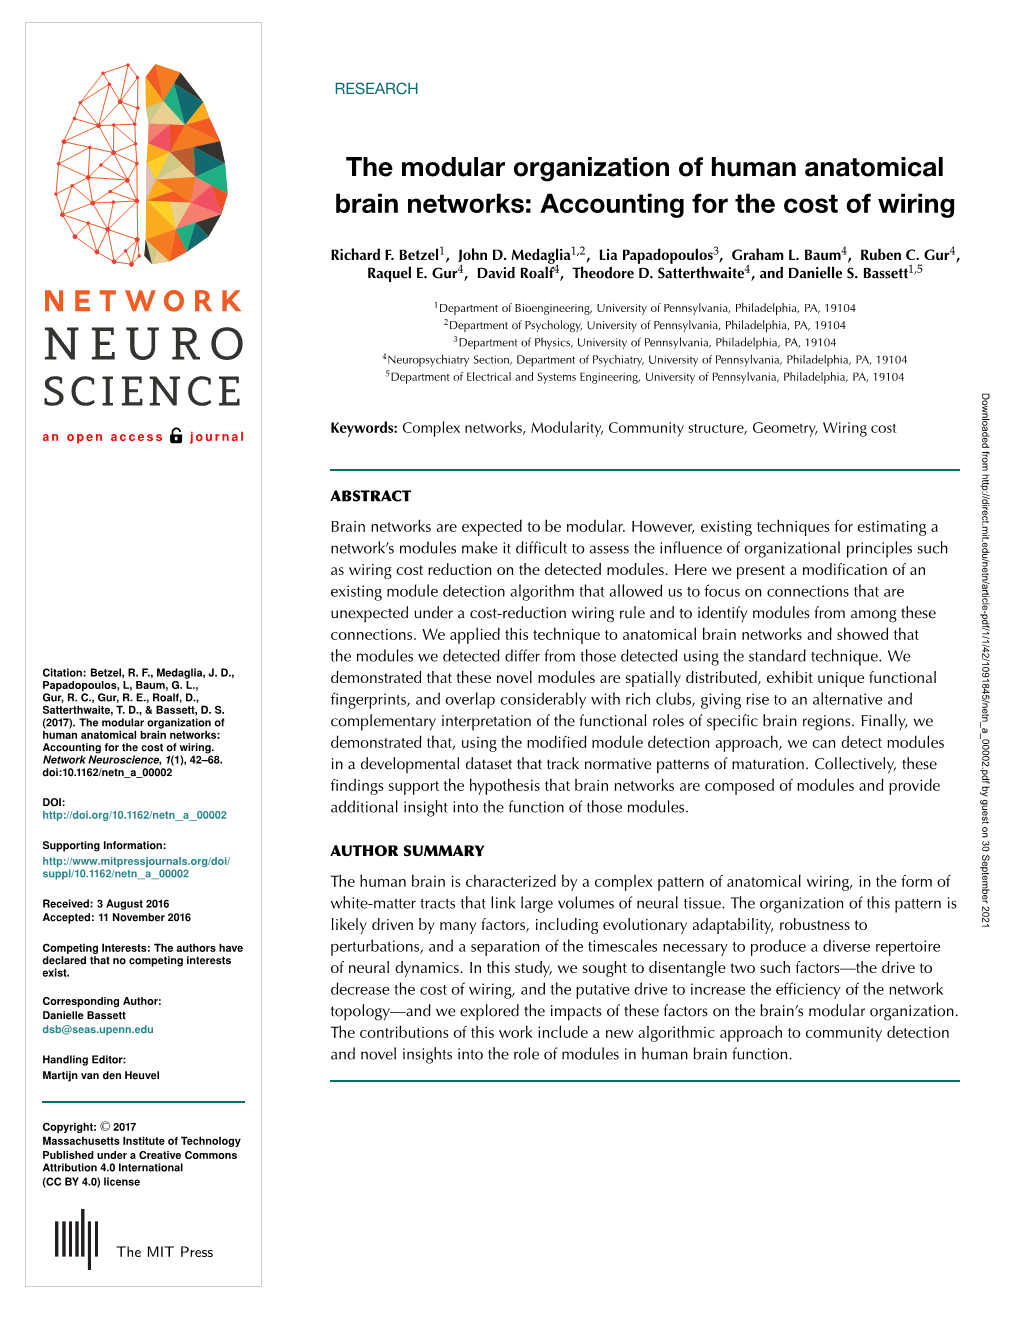 The Modular Organization of Human Anatomical Brain Networks: Accounting for the Cost of Wiring